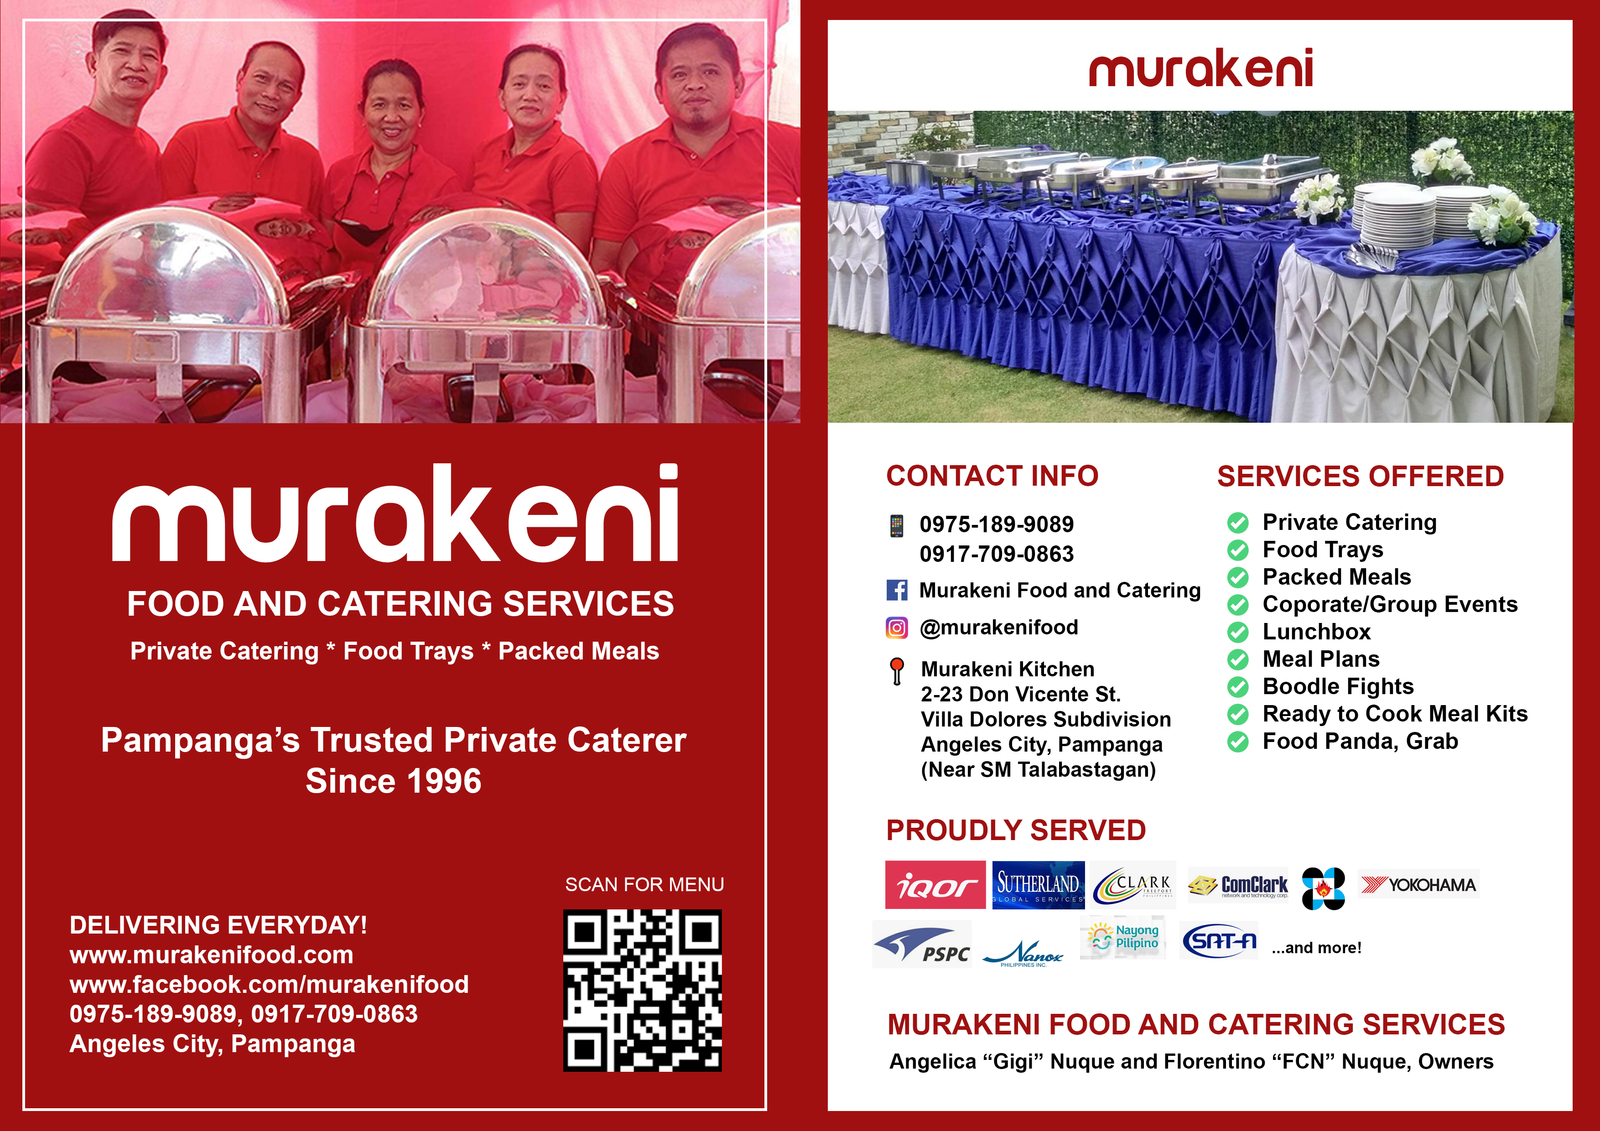 Murakeni Food and Catering Services - Intro Page